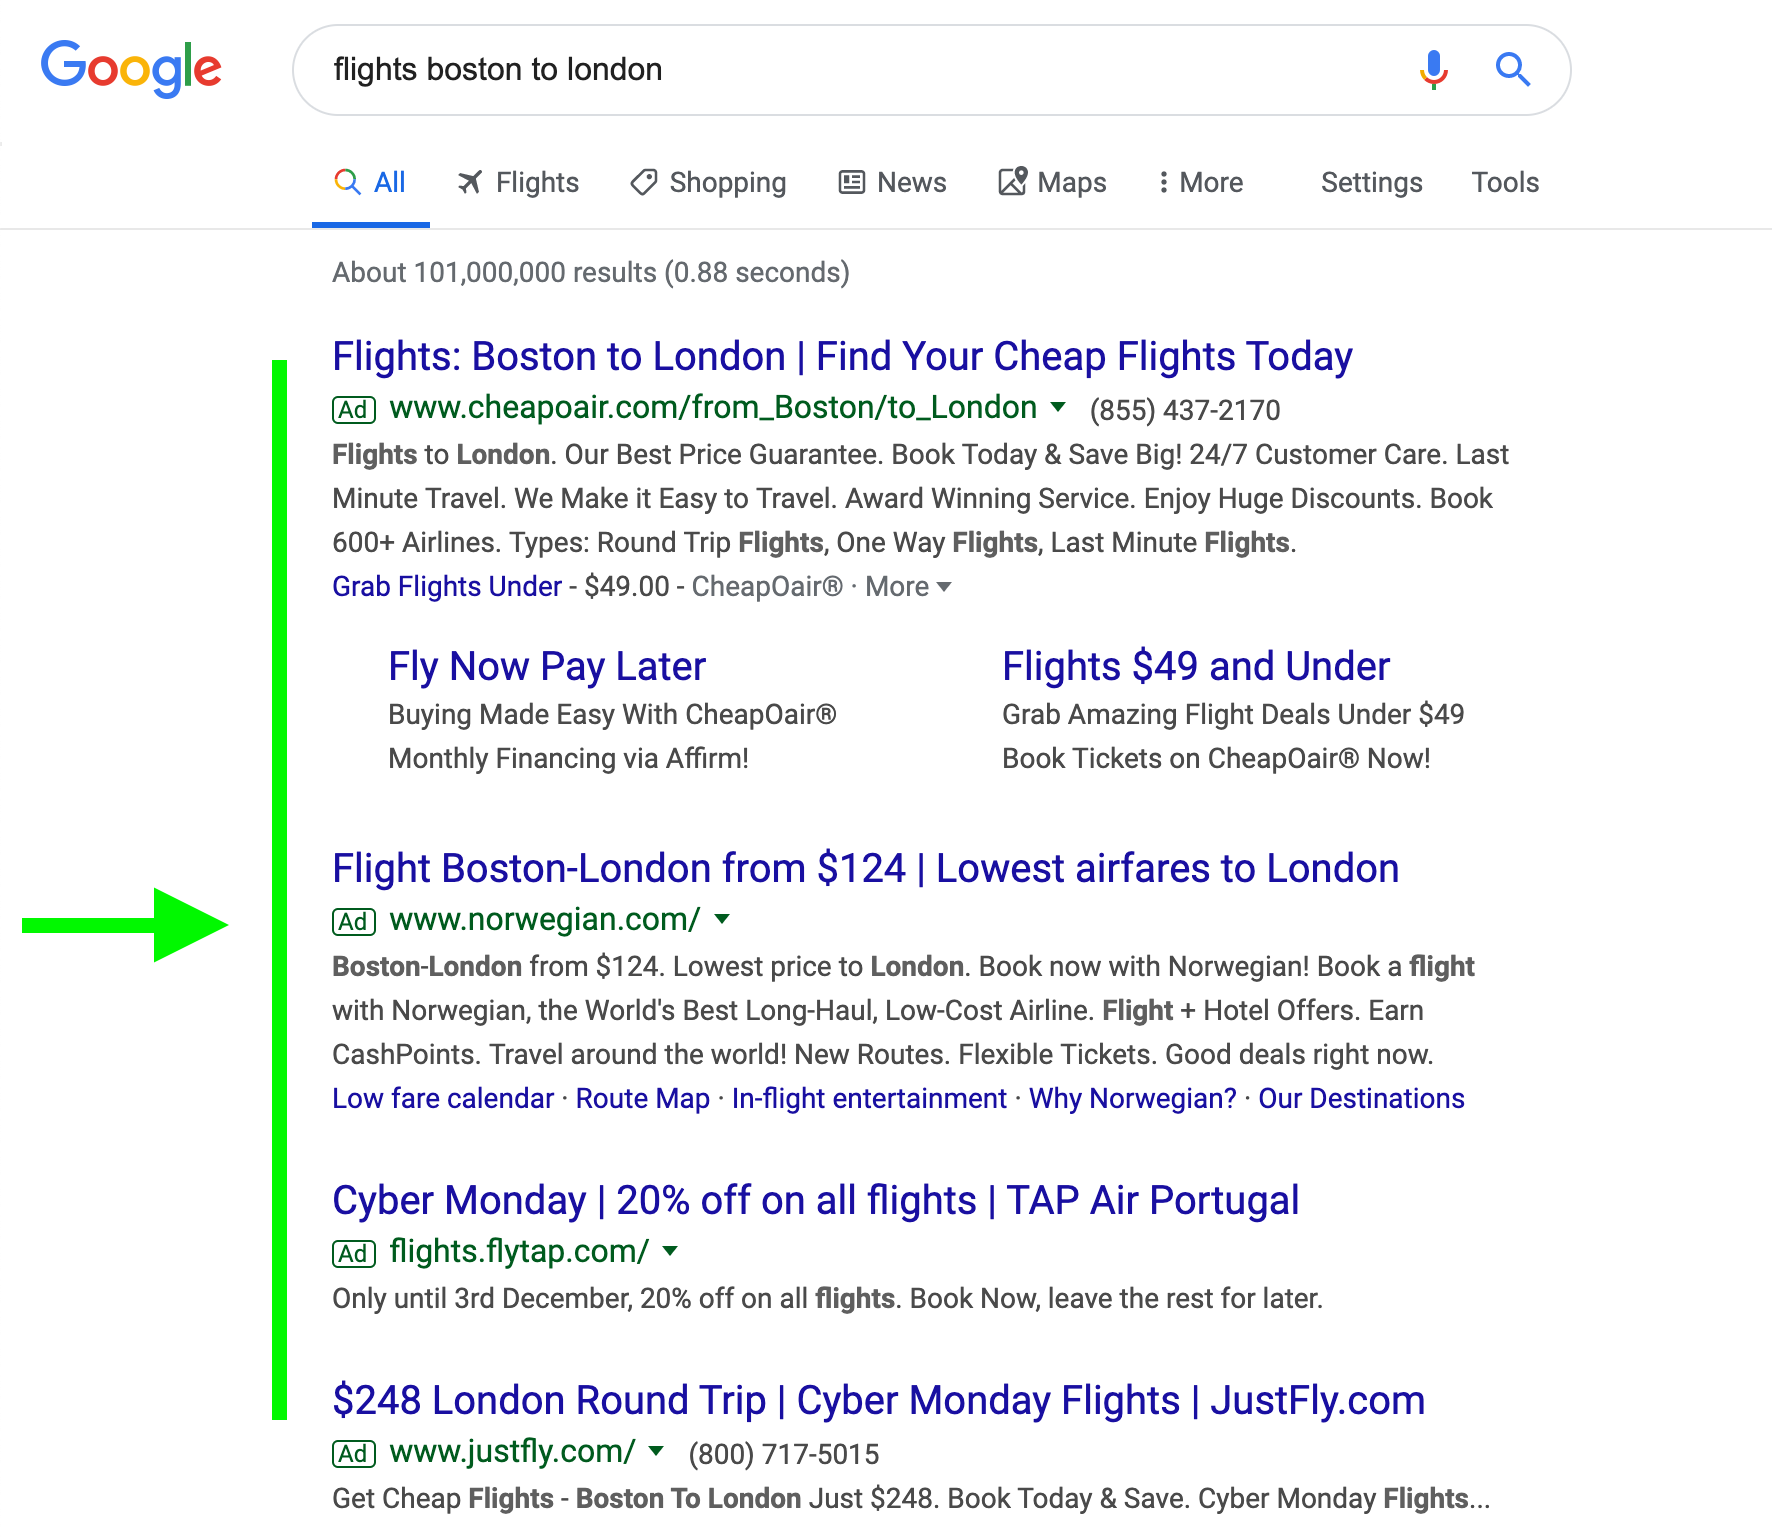 A screenshot of Google search results for flights Boston to London with a green arrow pointing to the second result.